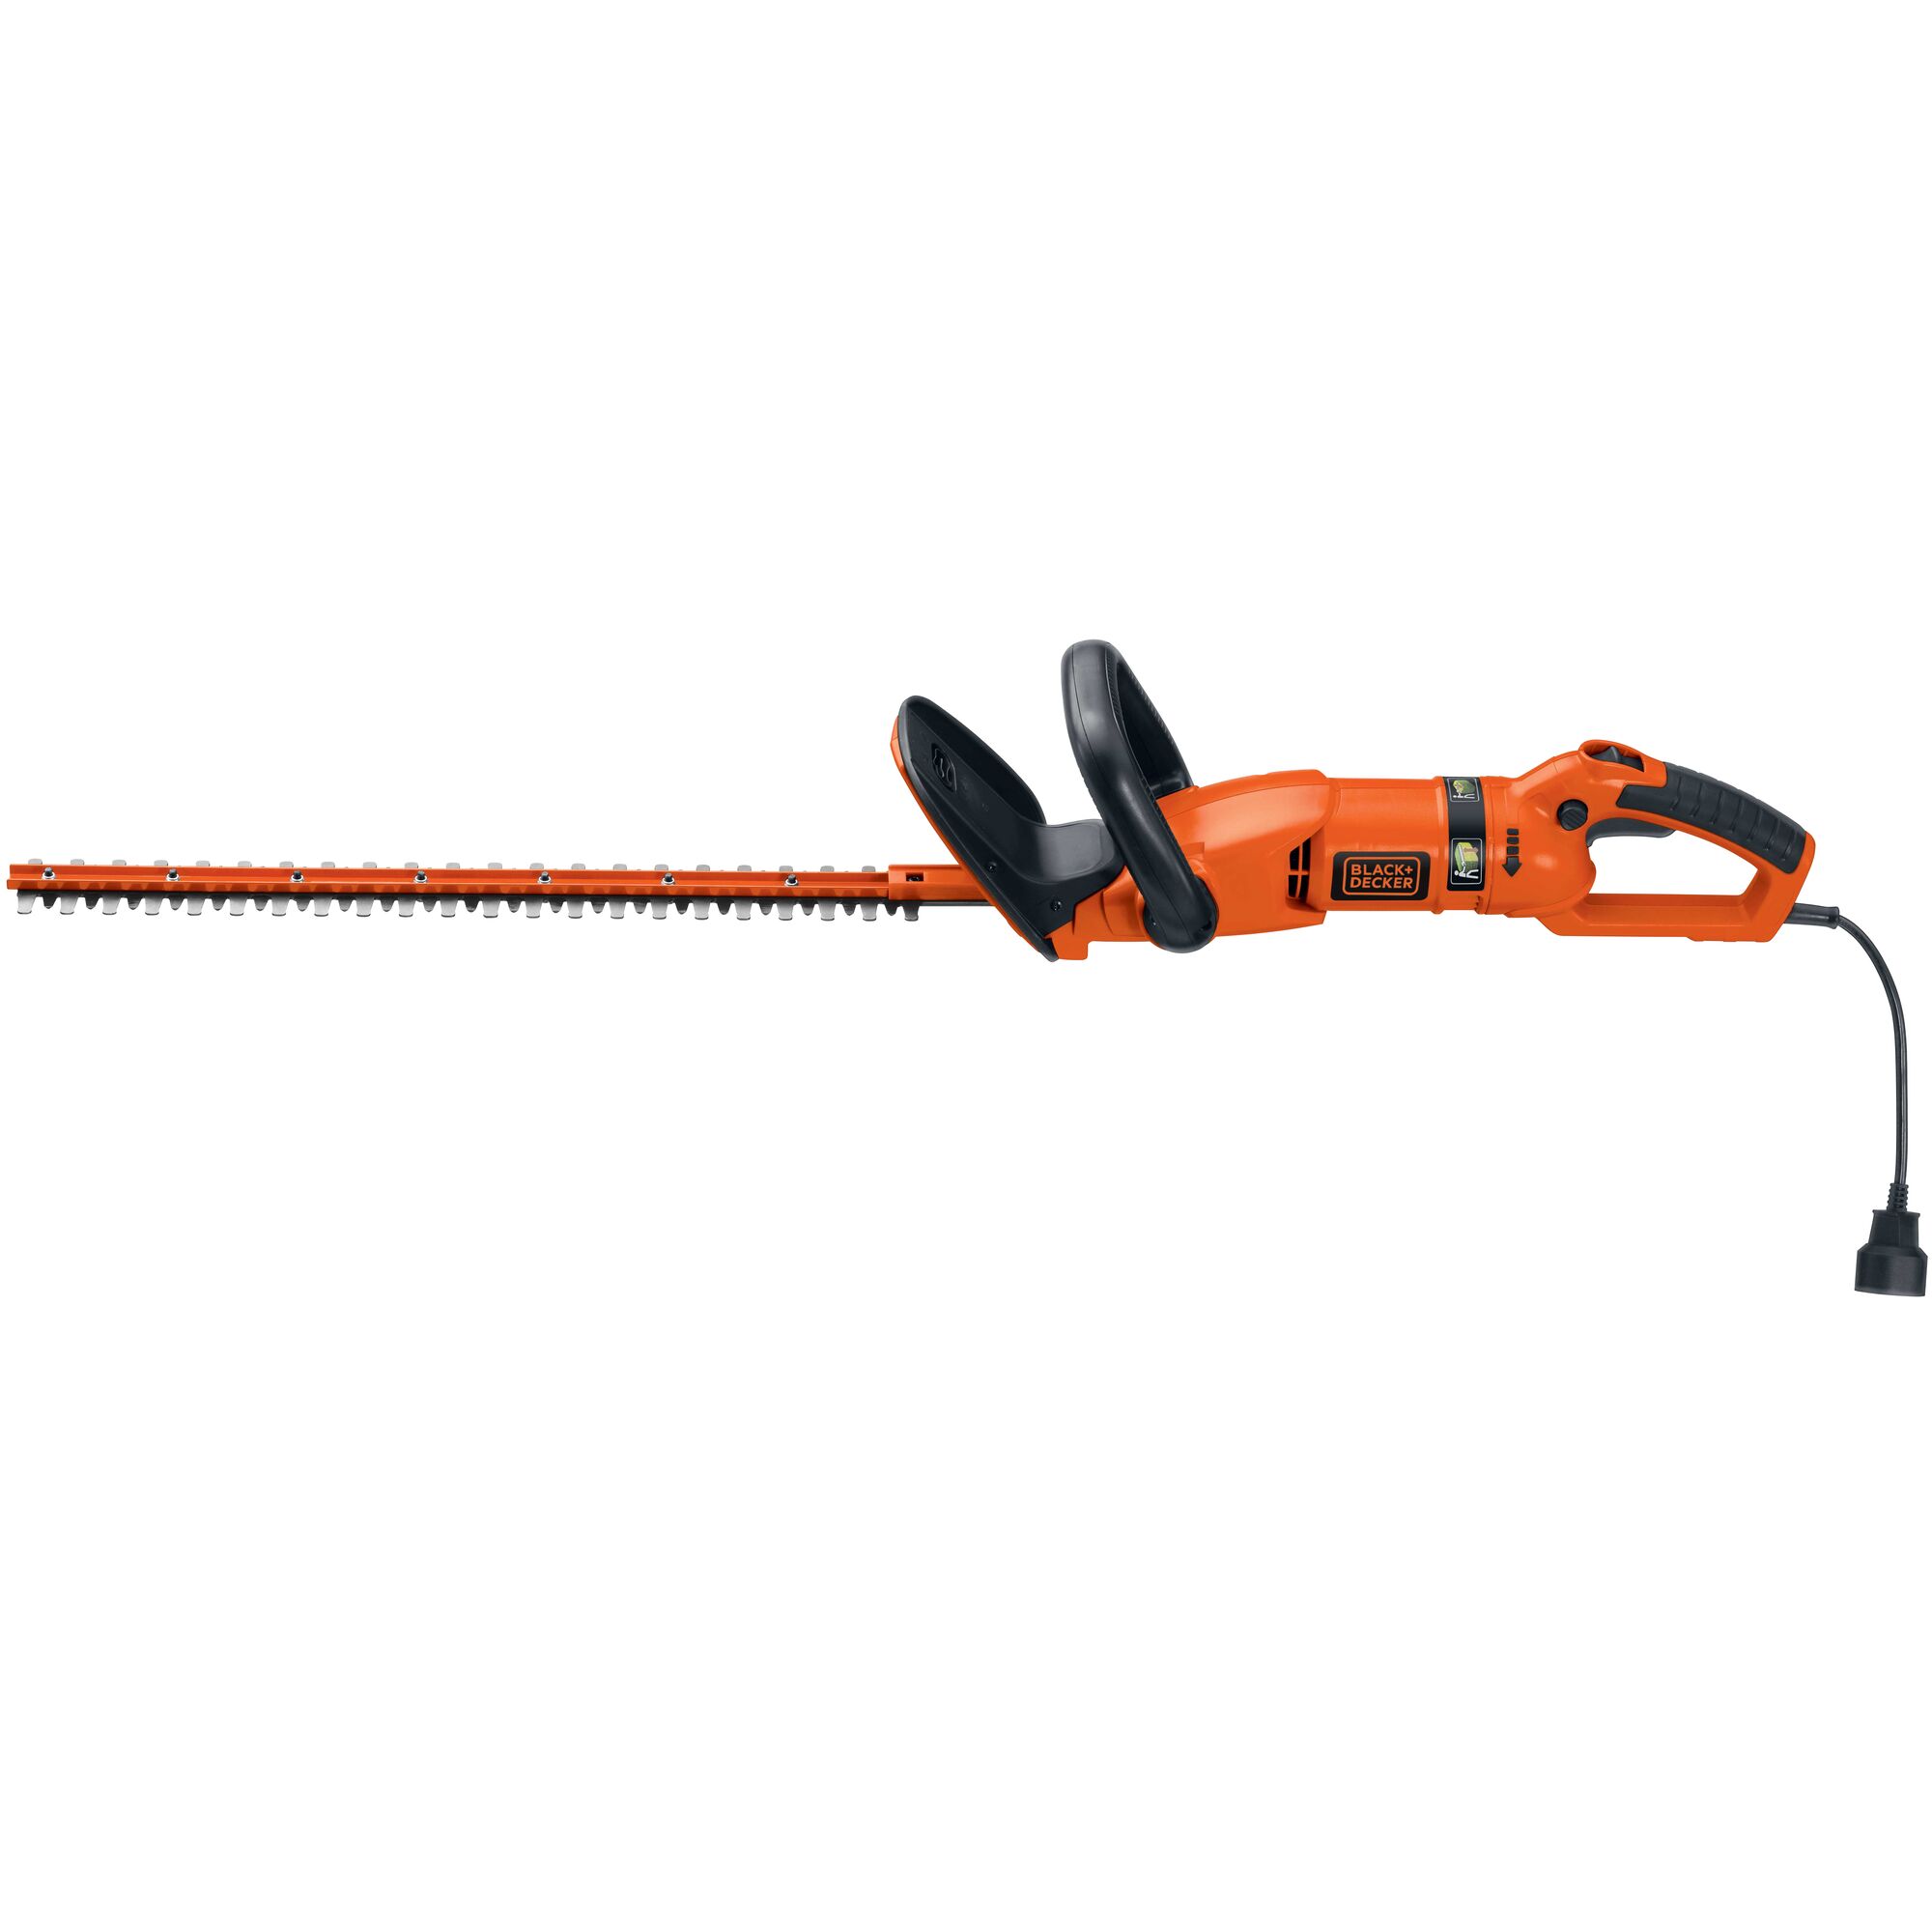 Profile of 24 inch hedge trimmer with rotating handle.